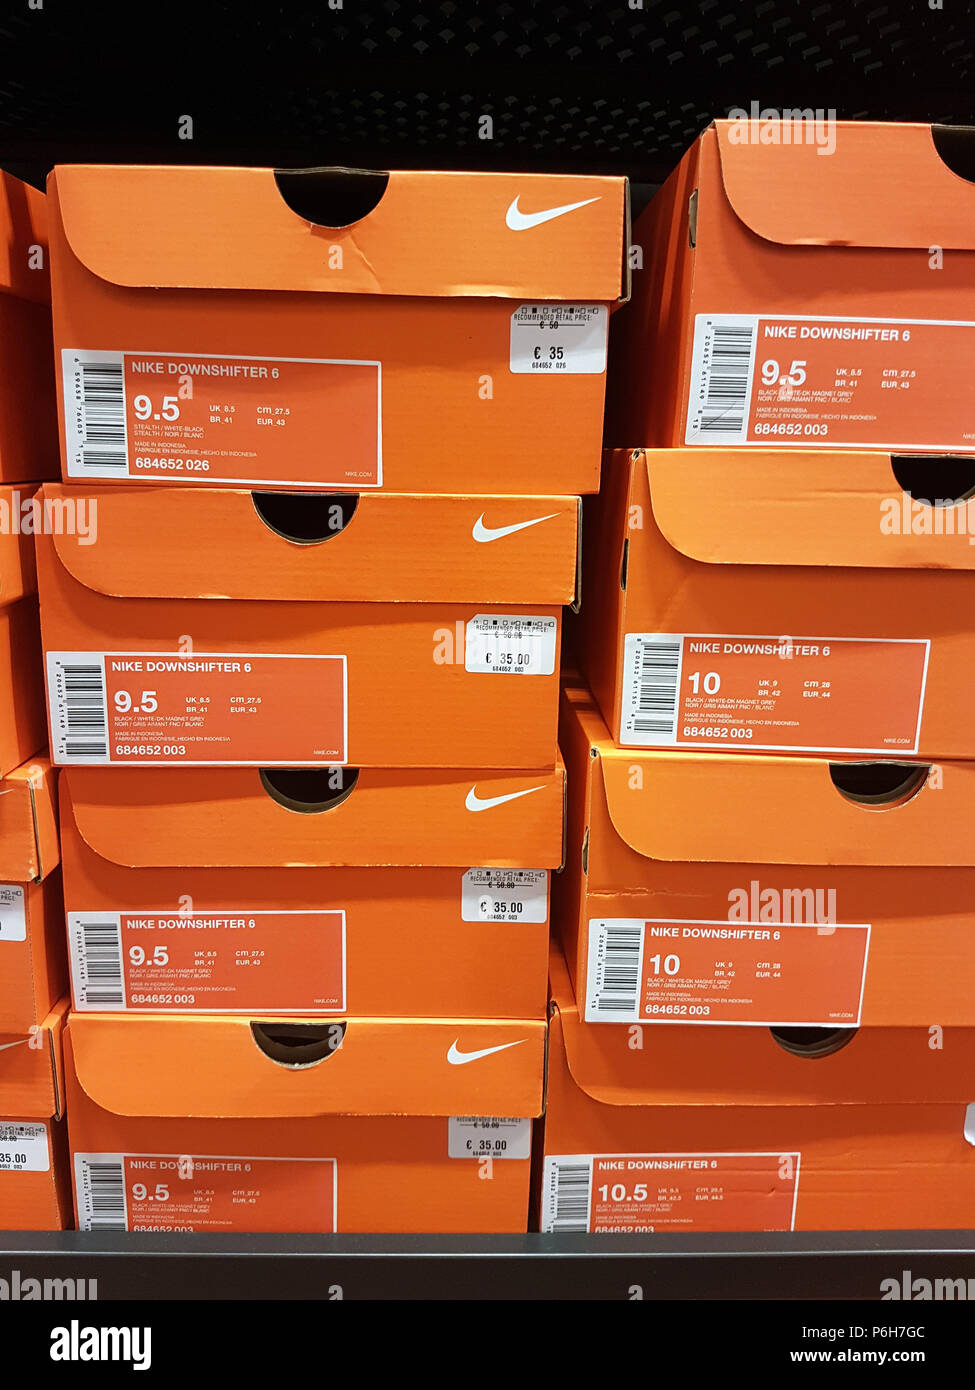 Emuleren Harde wind Nationale volkstelling Villefontaine, France - June 29 2018: Orange Nike Shoes Boxes Stacked on a  Shelf in Nike Outlet Store at The Village Outlet Shopping Complex in IsÃ¨re  Stock Photo - Alamy